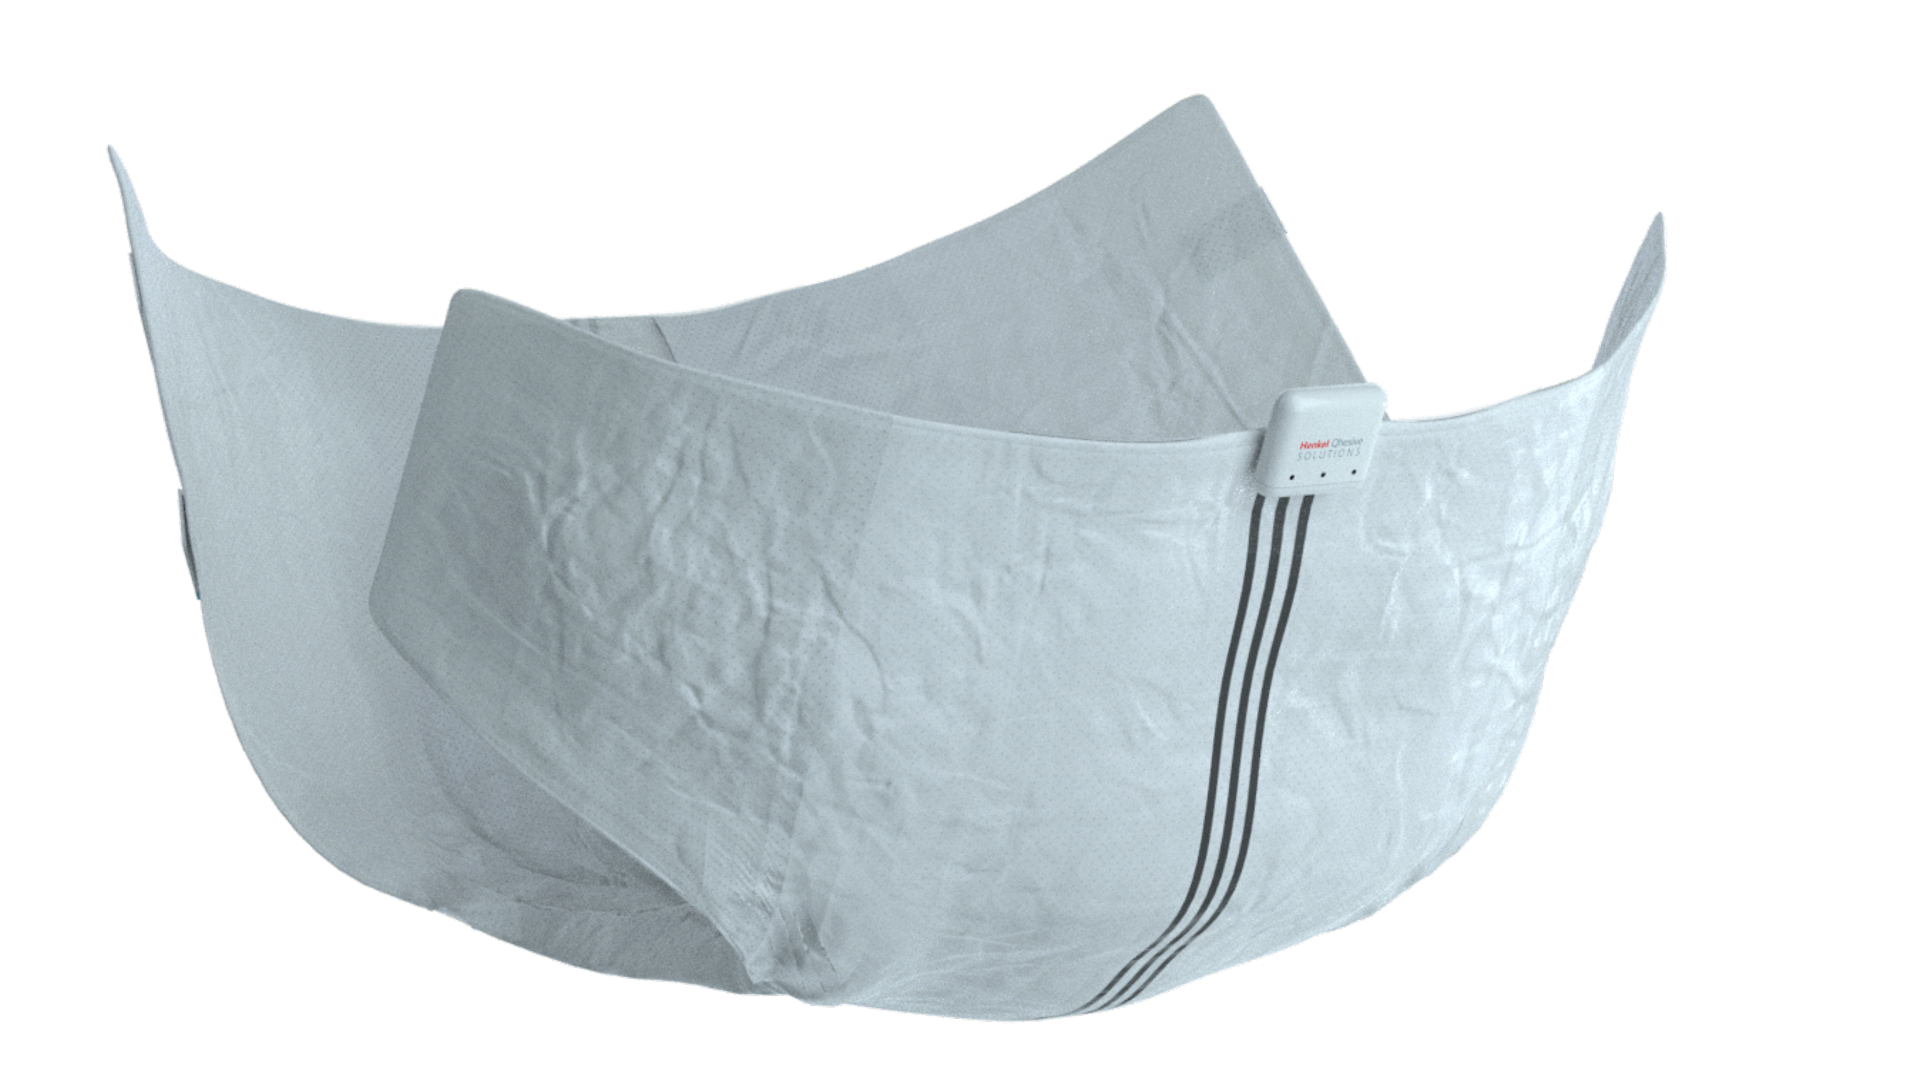 A diaper with three printed electronic stripes that has a pod attached that can transmit real-time patient data.